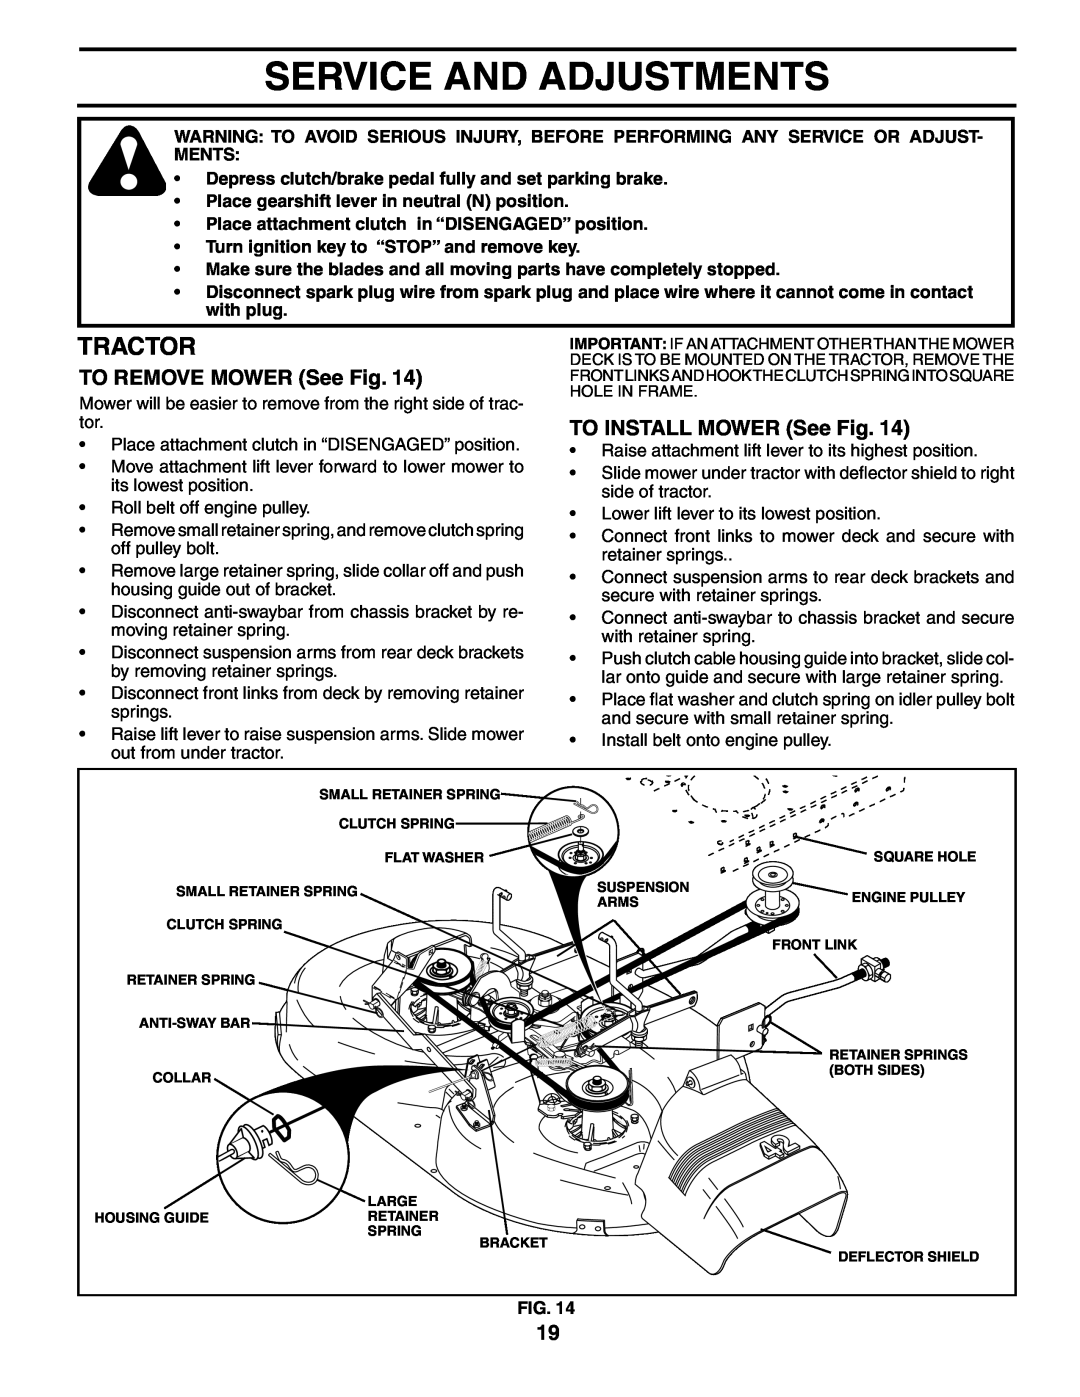 Poulan 401115, 96012004600 manual Service And Adjustments, TO REMOVE MOWER See Fig, TO INSTALL MOWER See Fig, Tractor 